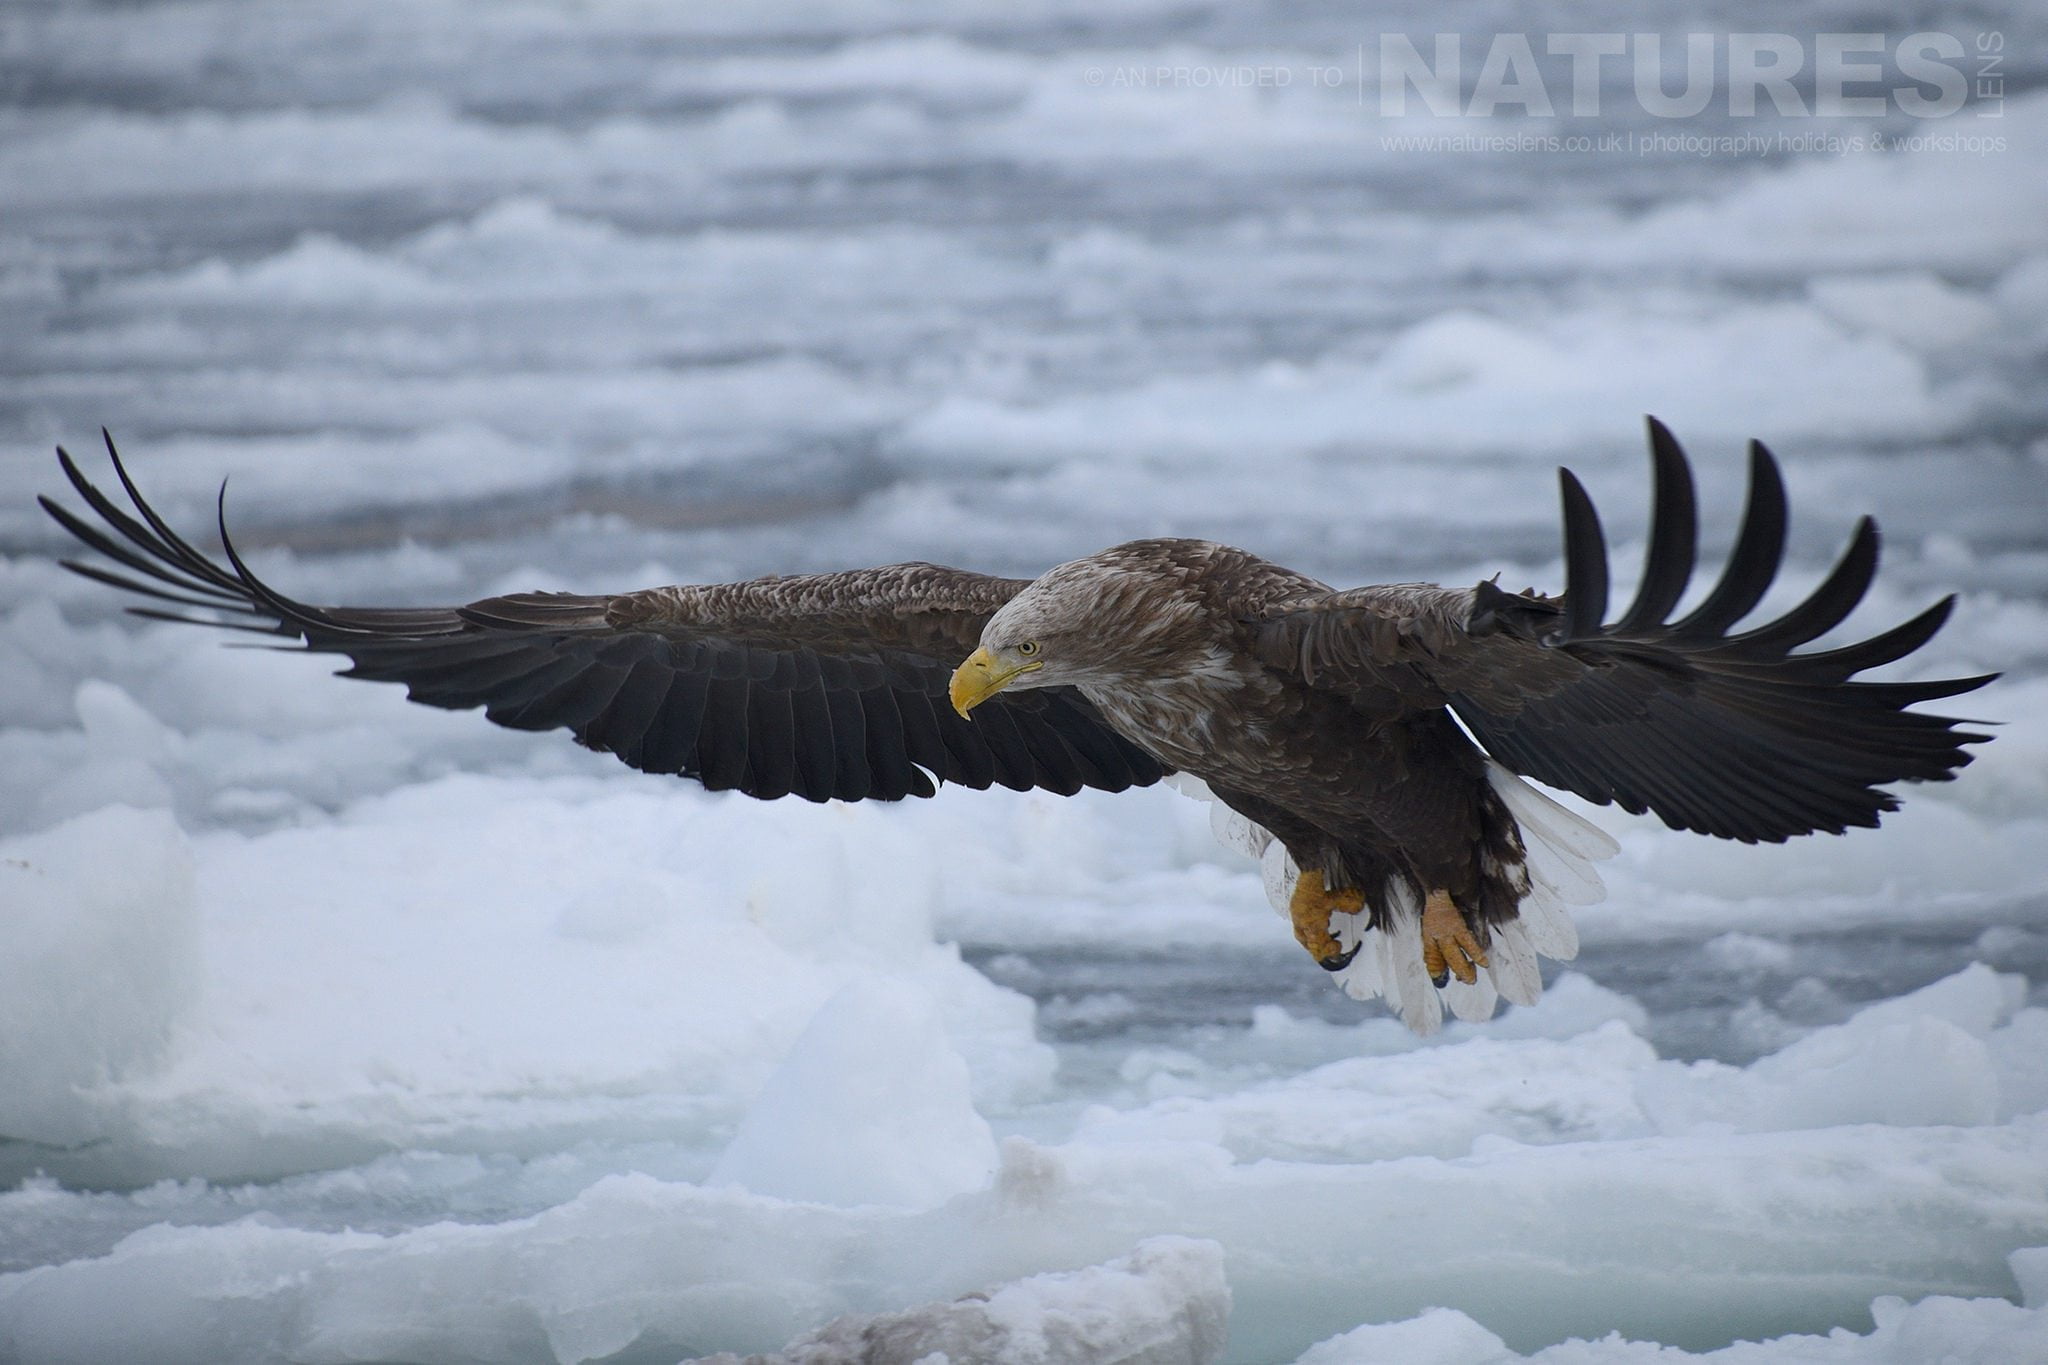 One Of The White Tailed Sea Eagles Flies Over The Frozen Pack Ice Located On The Coast Of Rausu Captured Natureslens During The Winter Wildlife Of Japan Photography Holiday